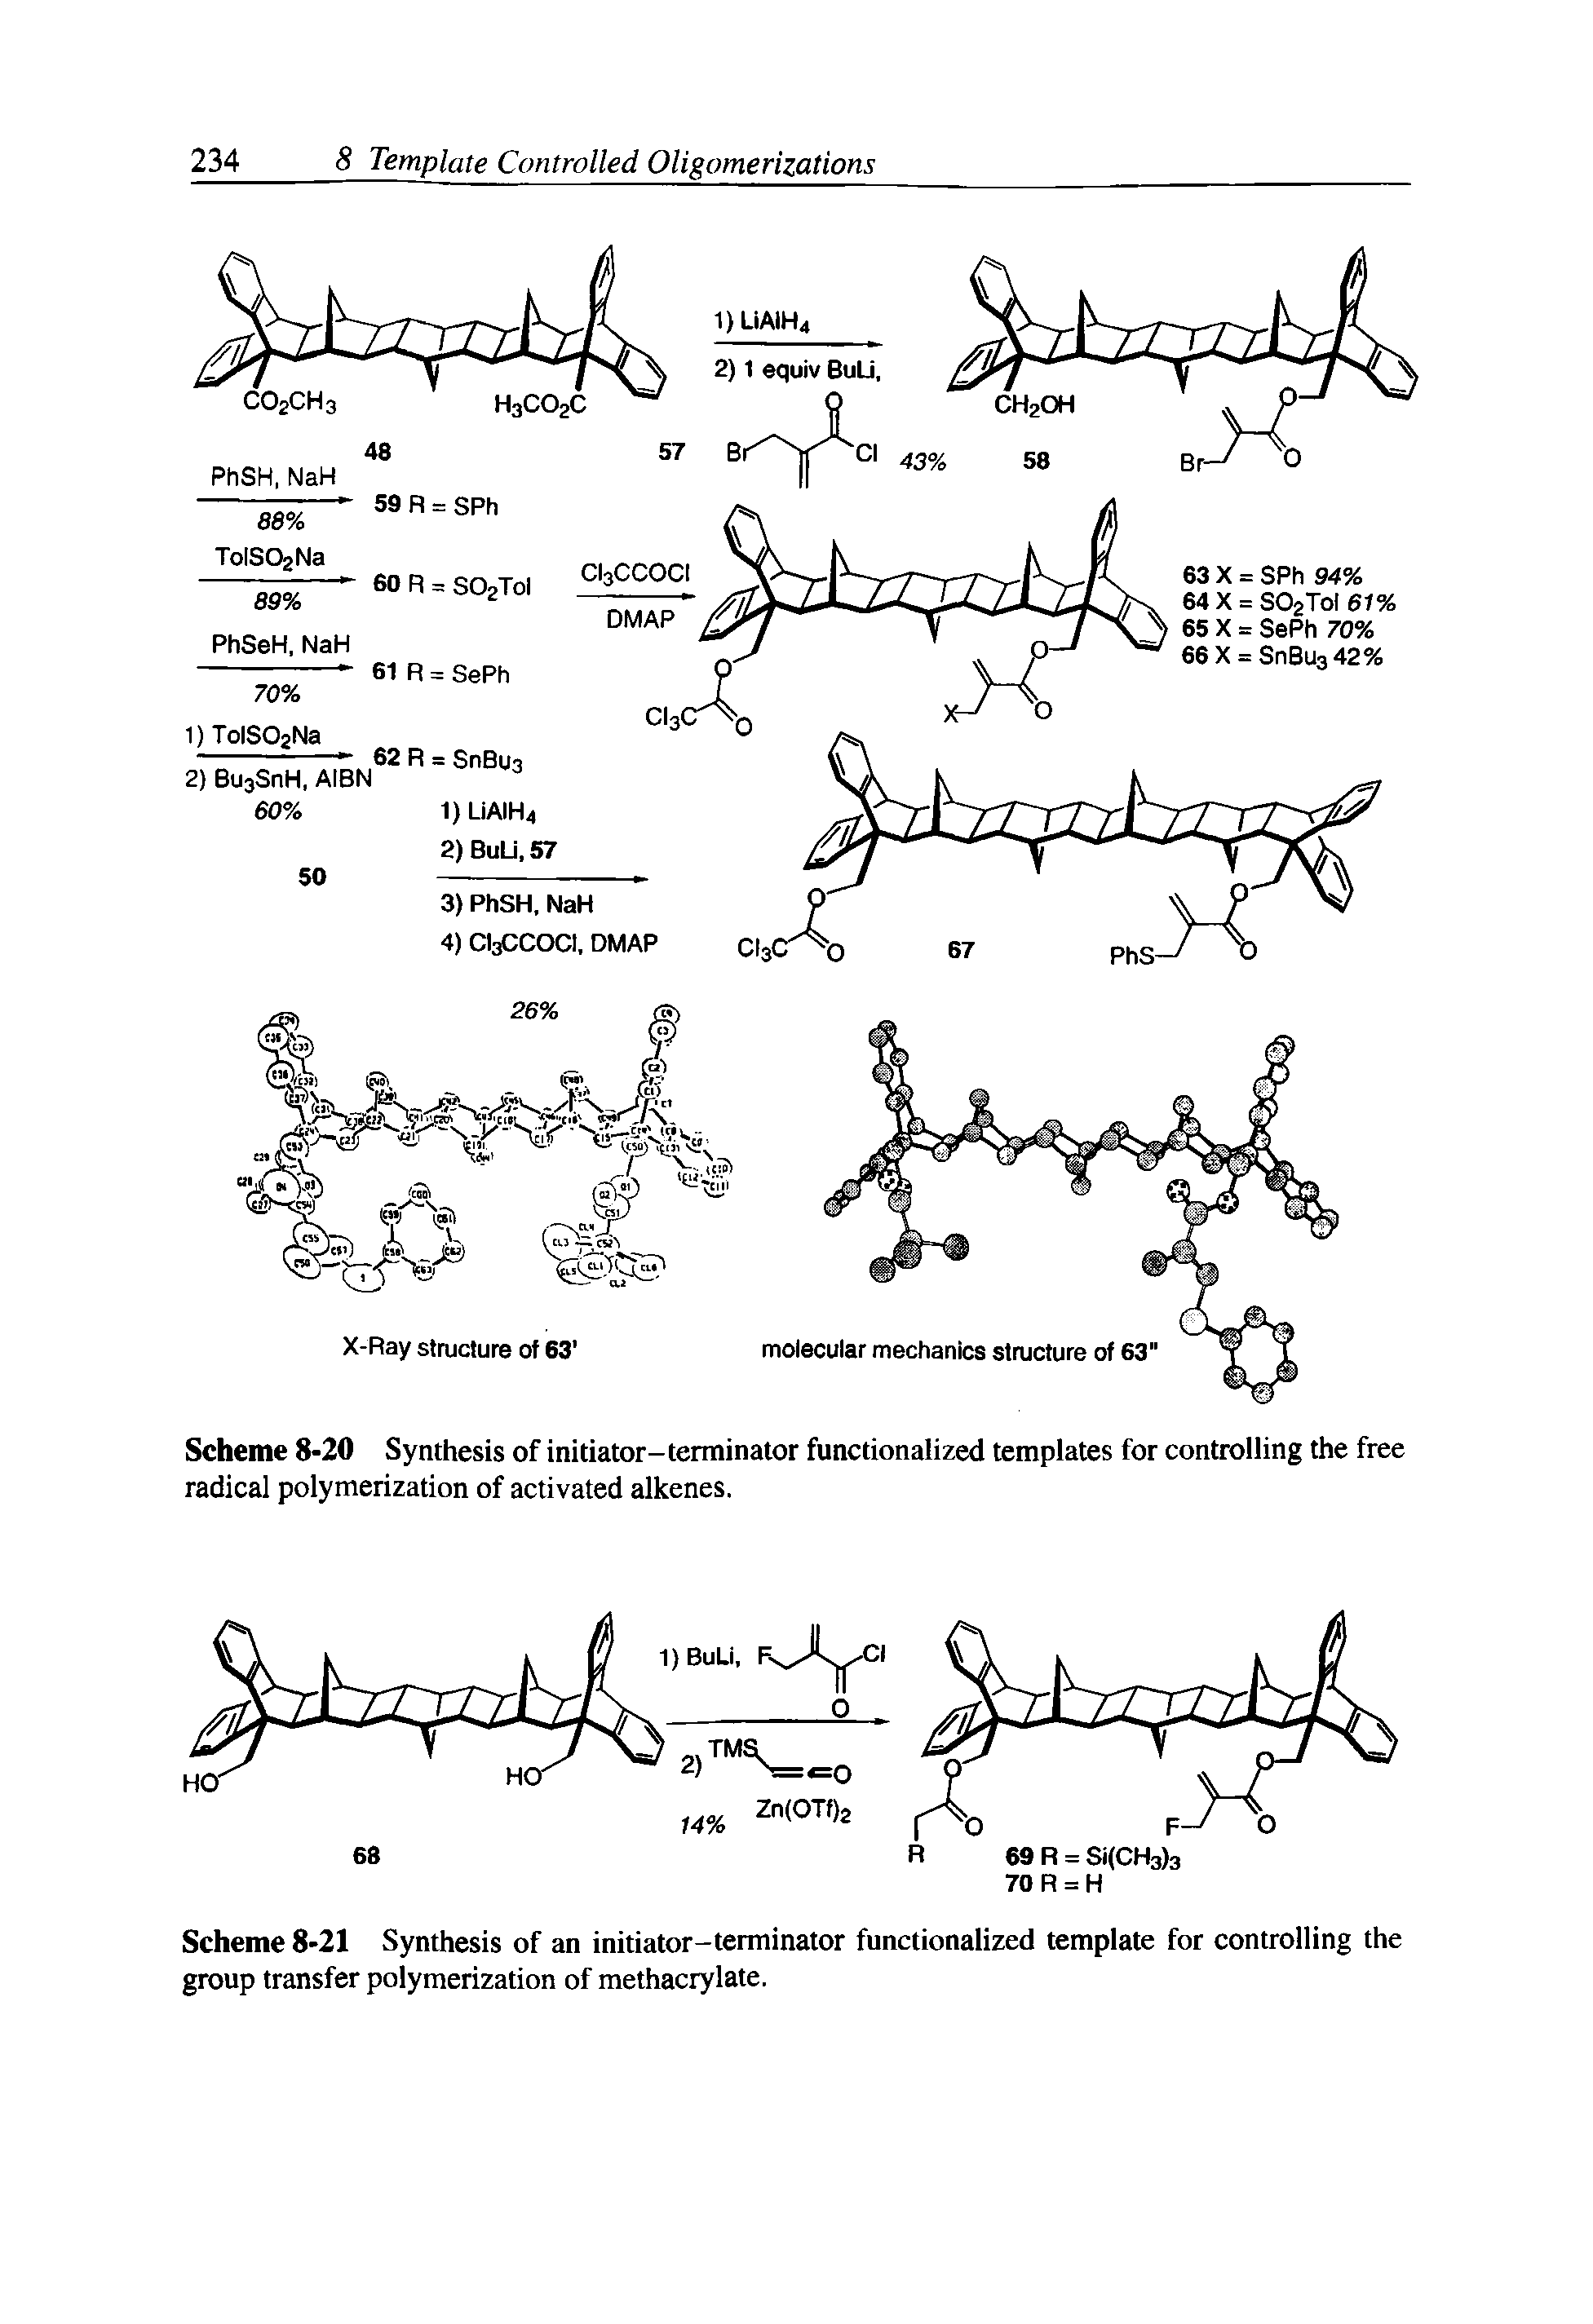 Scheme 8-20 Synthesis of initiator-terminator functionalized templates for controlling the free radical polymerization of activated alkenes.